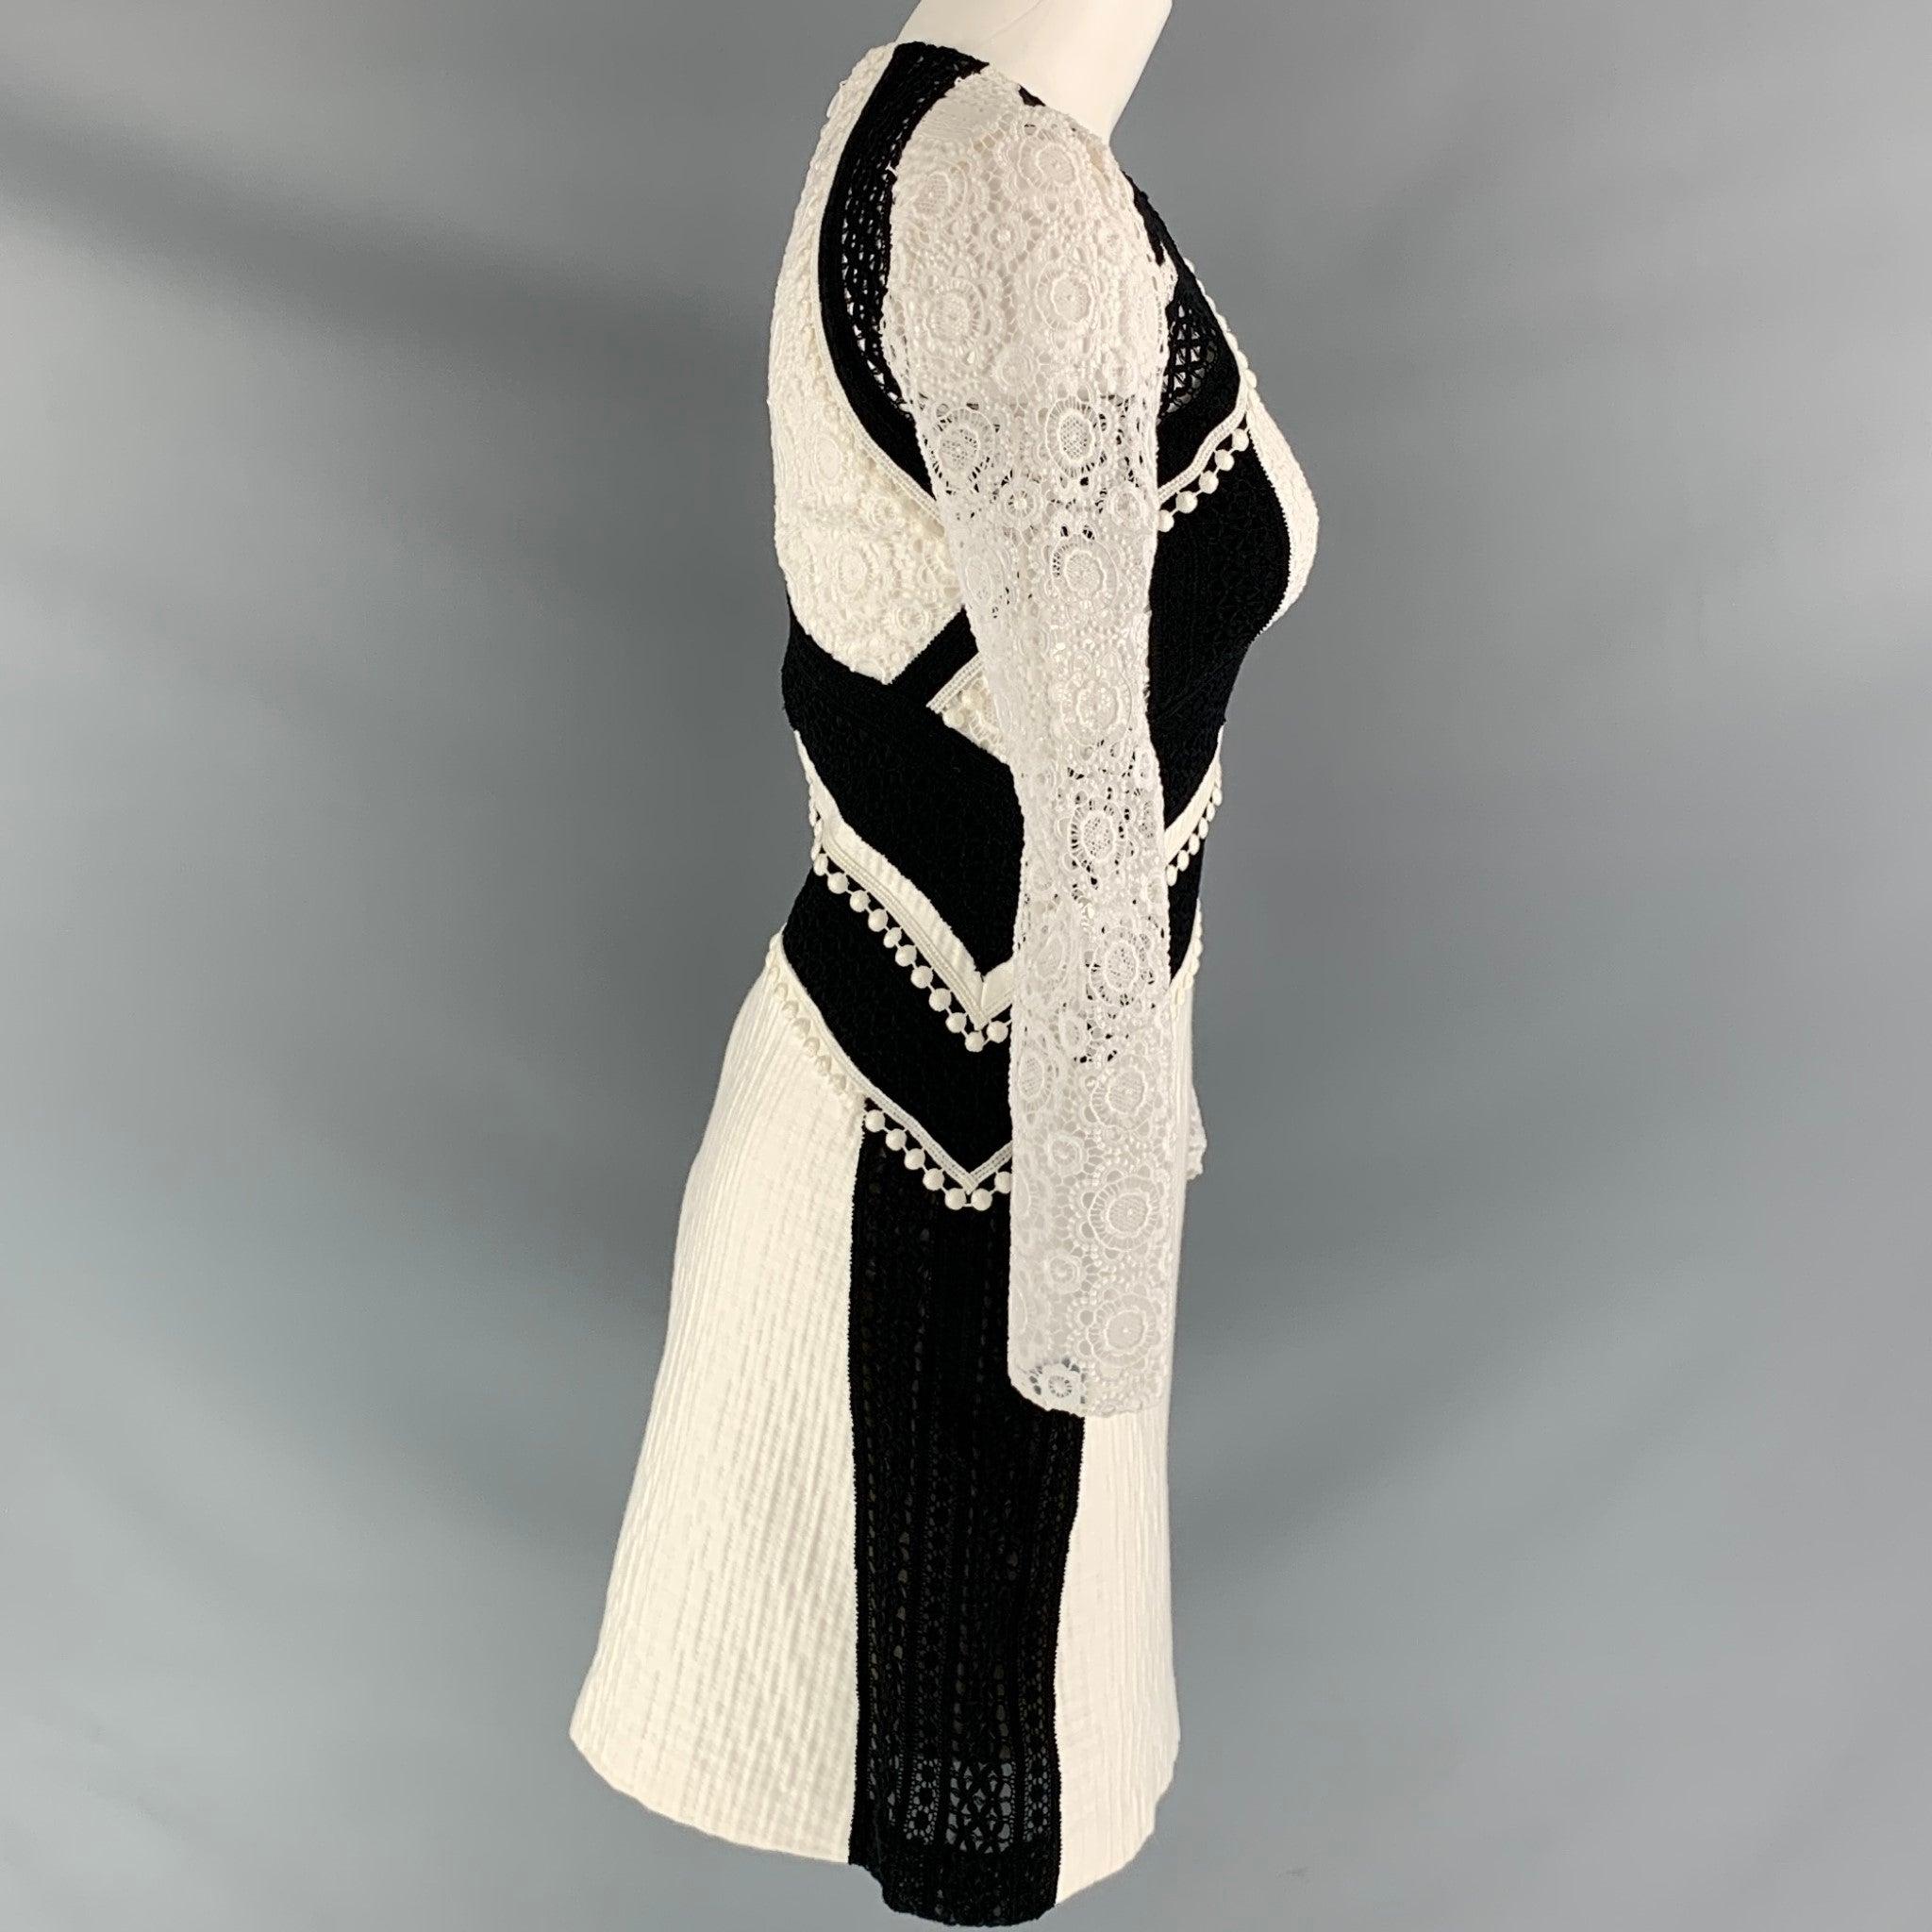 BURBERRY PRORSUM Size 2 White Black Cotton Blend Lace Knee-Length Dress In Excellent Condition For Sale In San Francisco, CA